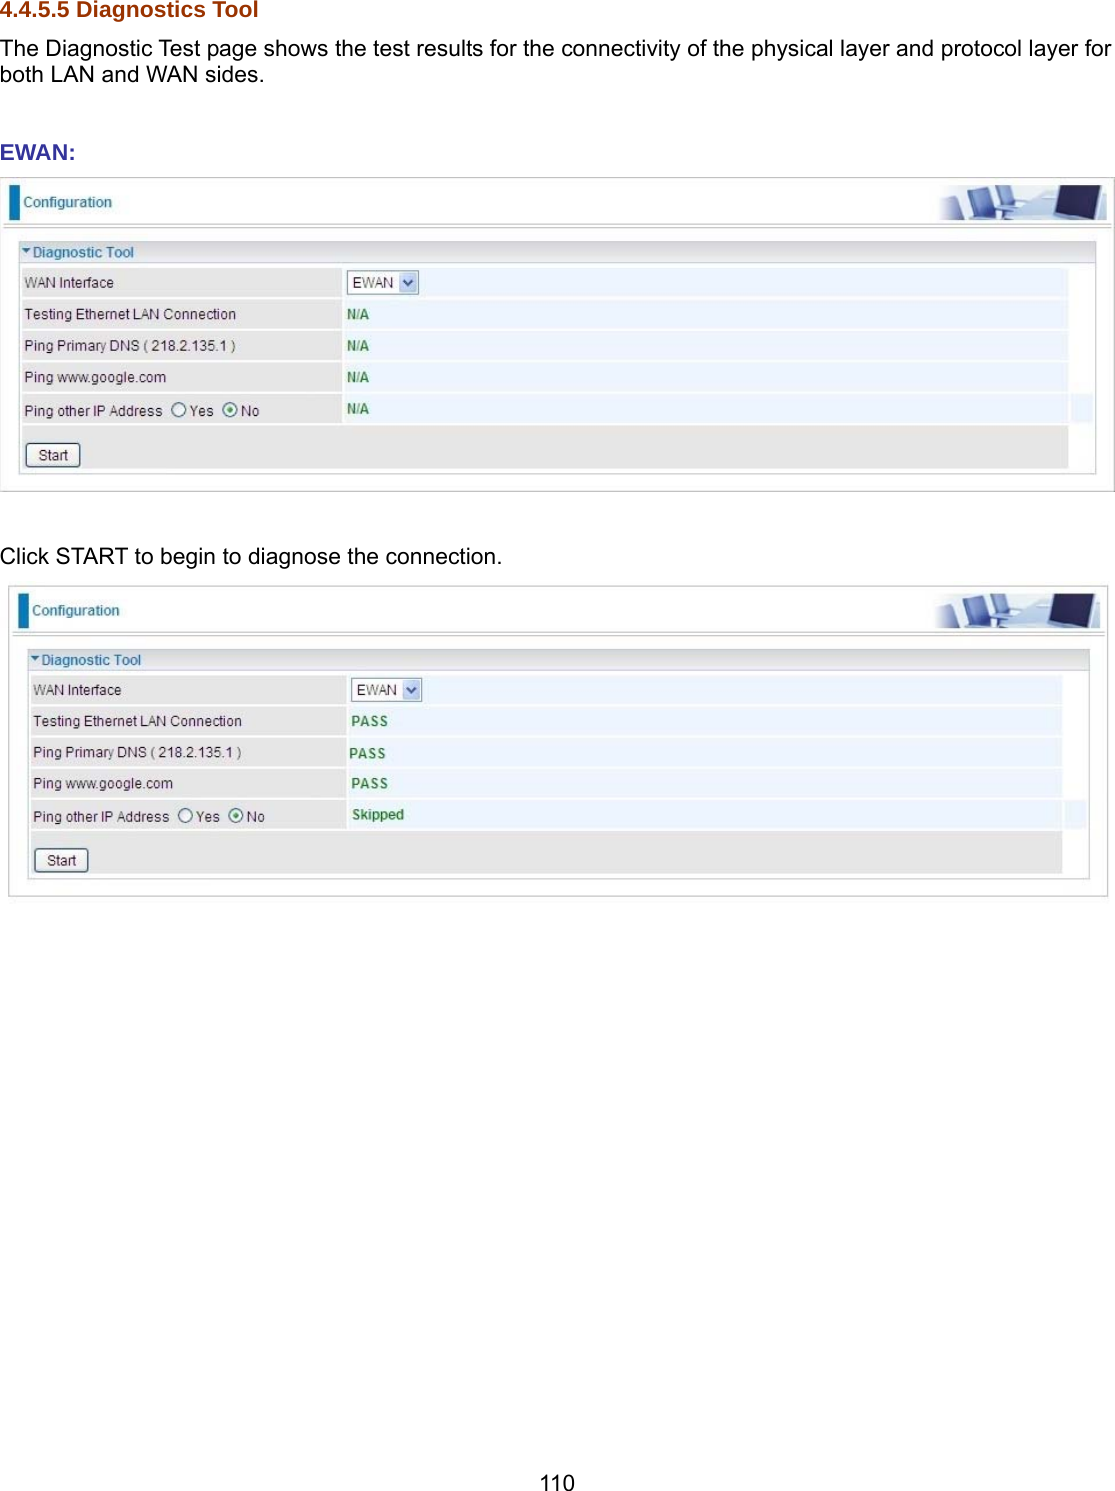 110 4.4.5.5 Diagnostics Tool The Diagnostic Test page shows the test results for the connectivity of the physical layer and protocol layer for both LAN and WAN sides.  EWAN:   Click START to begin to diagnose the connection.                